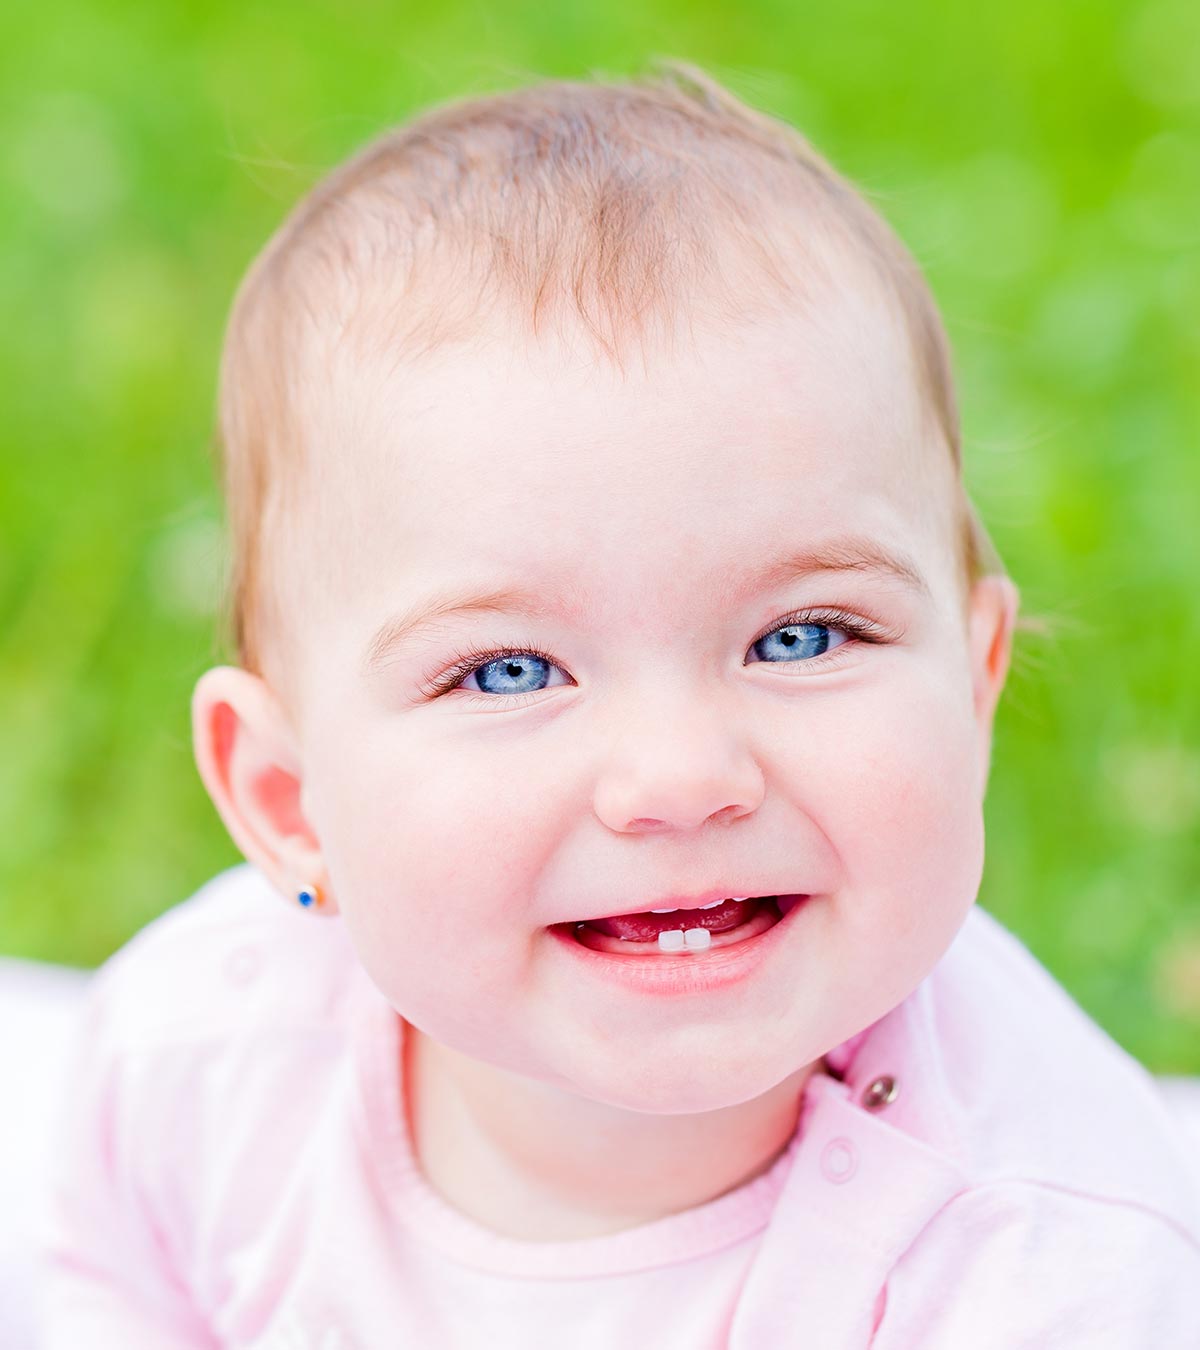 Baby Teething: What Are Its Signs And How To Soothe The Pain?